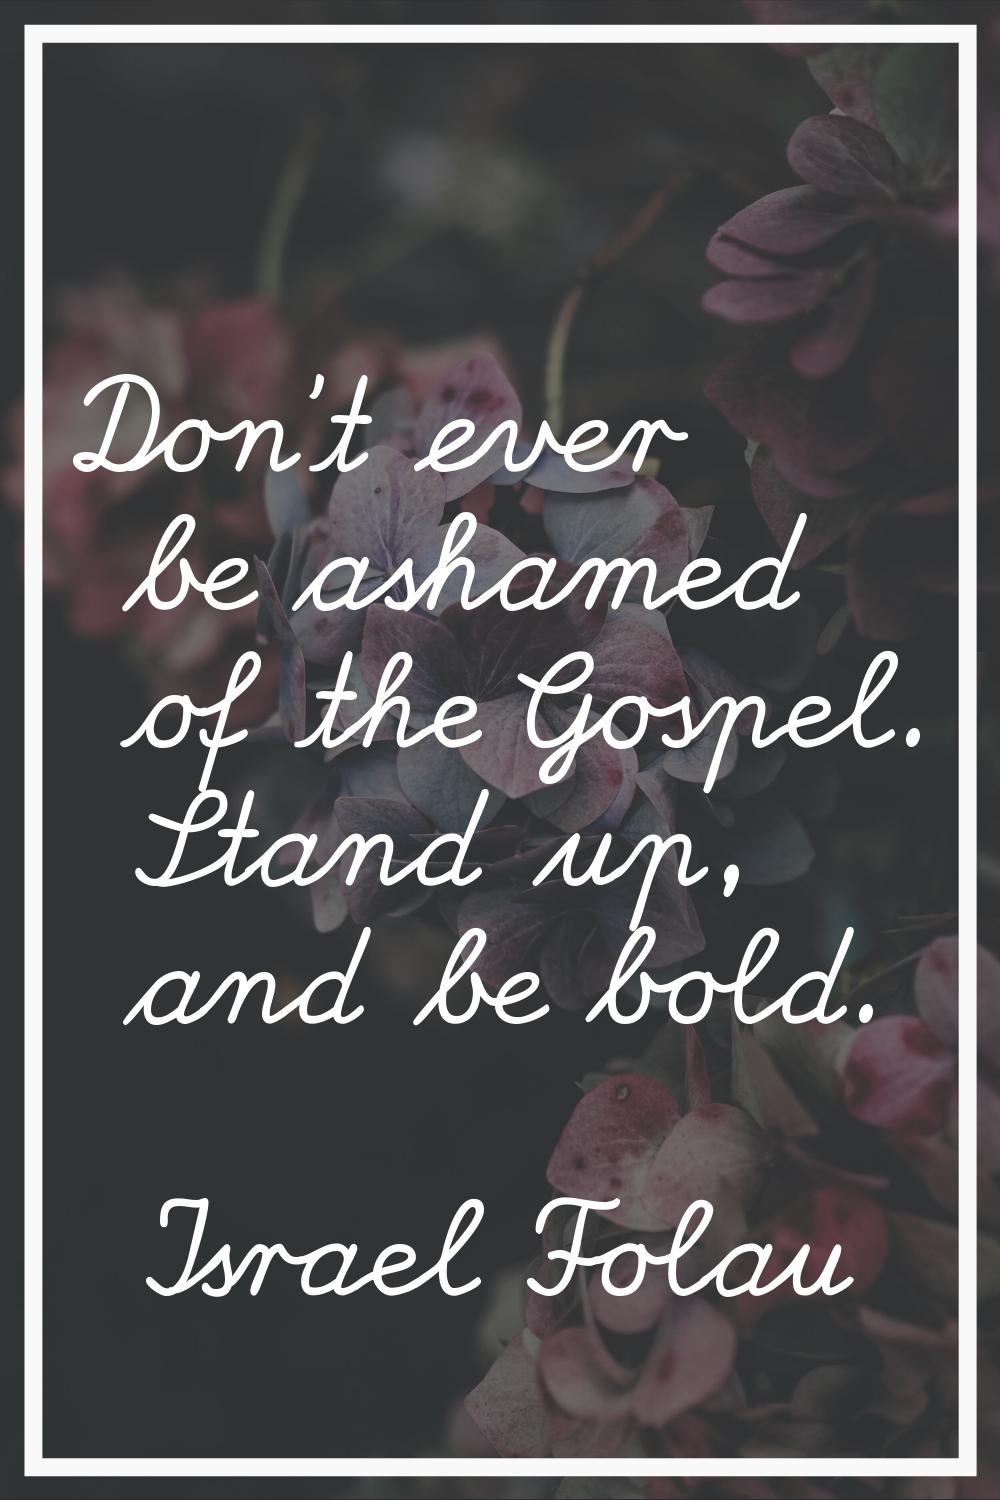 Don't ever be ashamed of the Gospel. Stand up, and be bold.